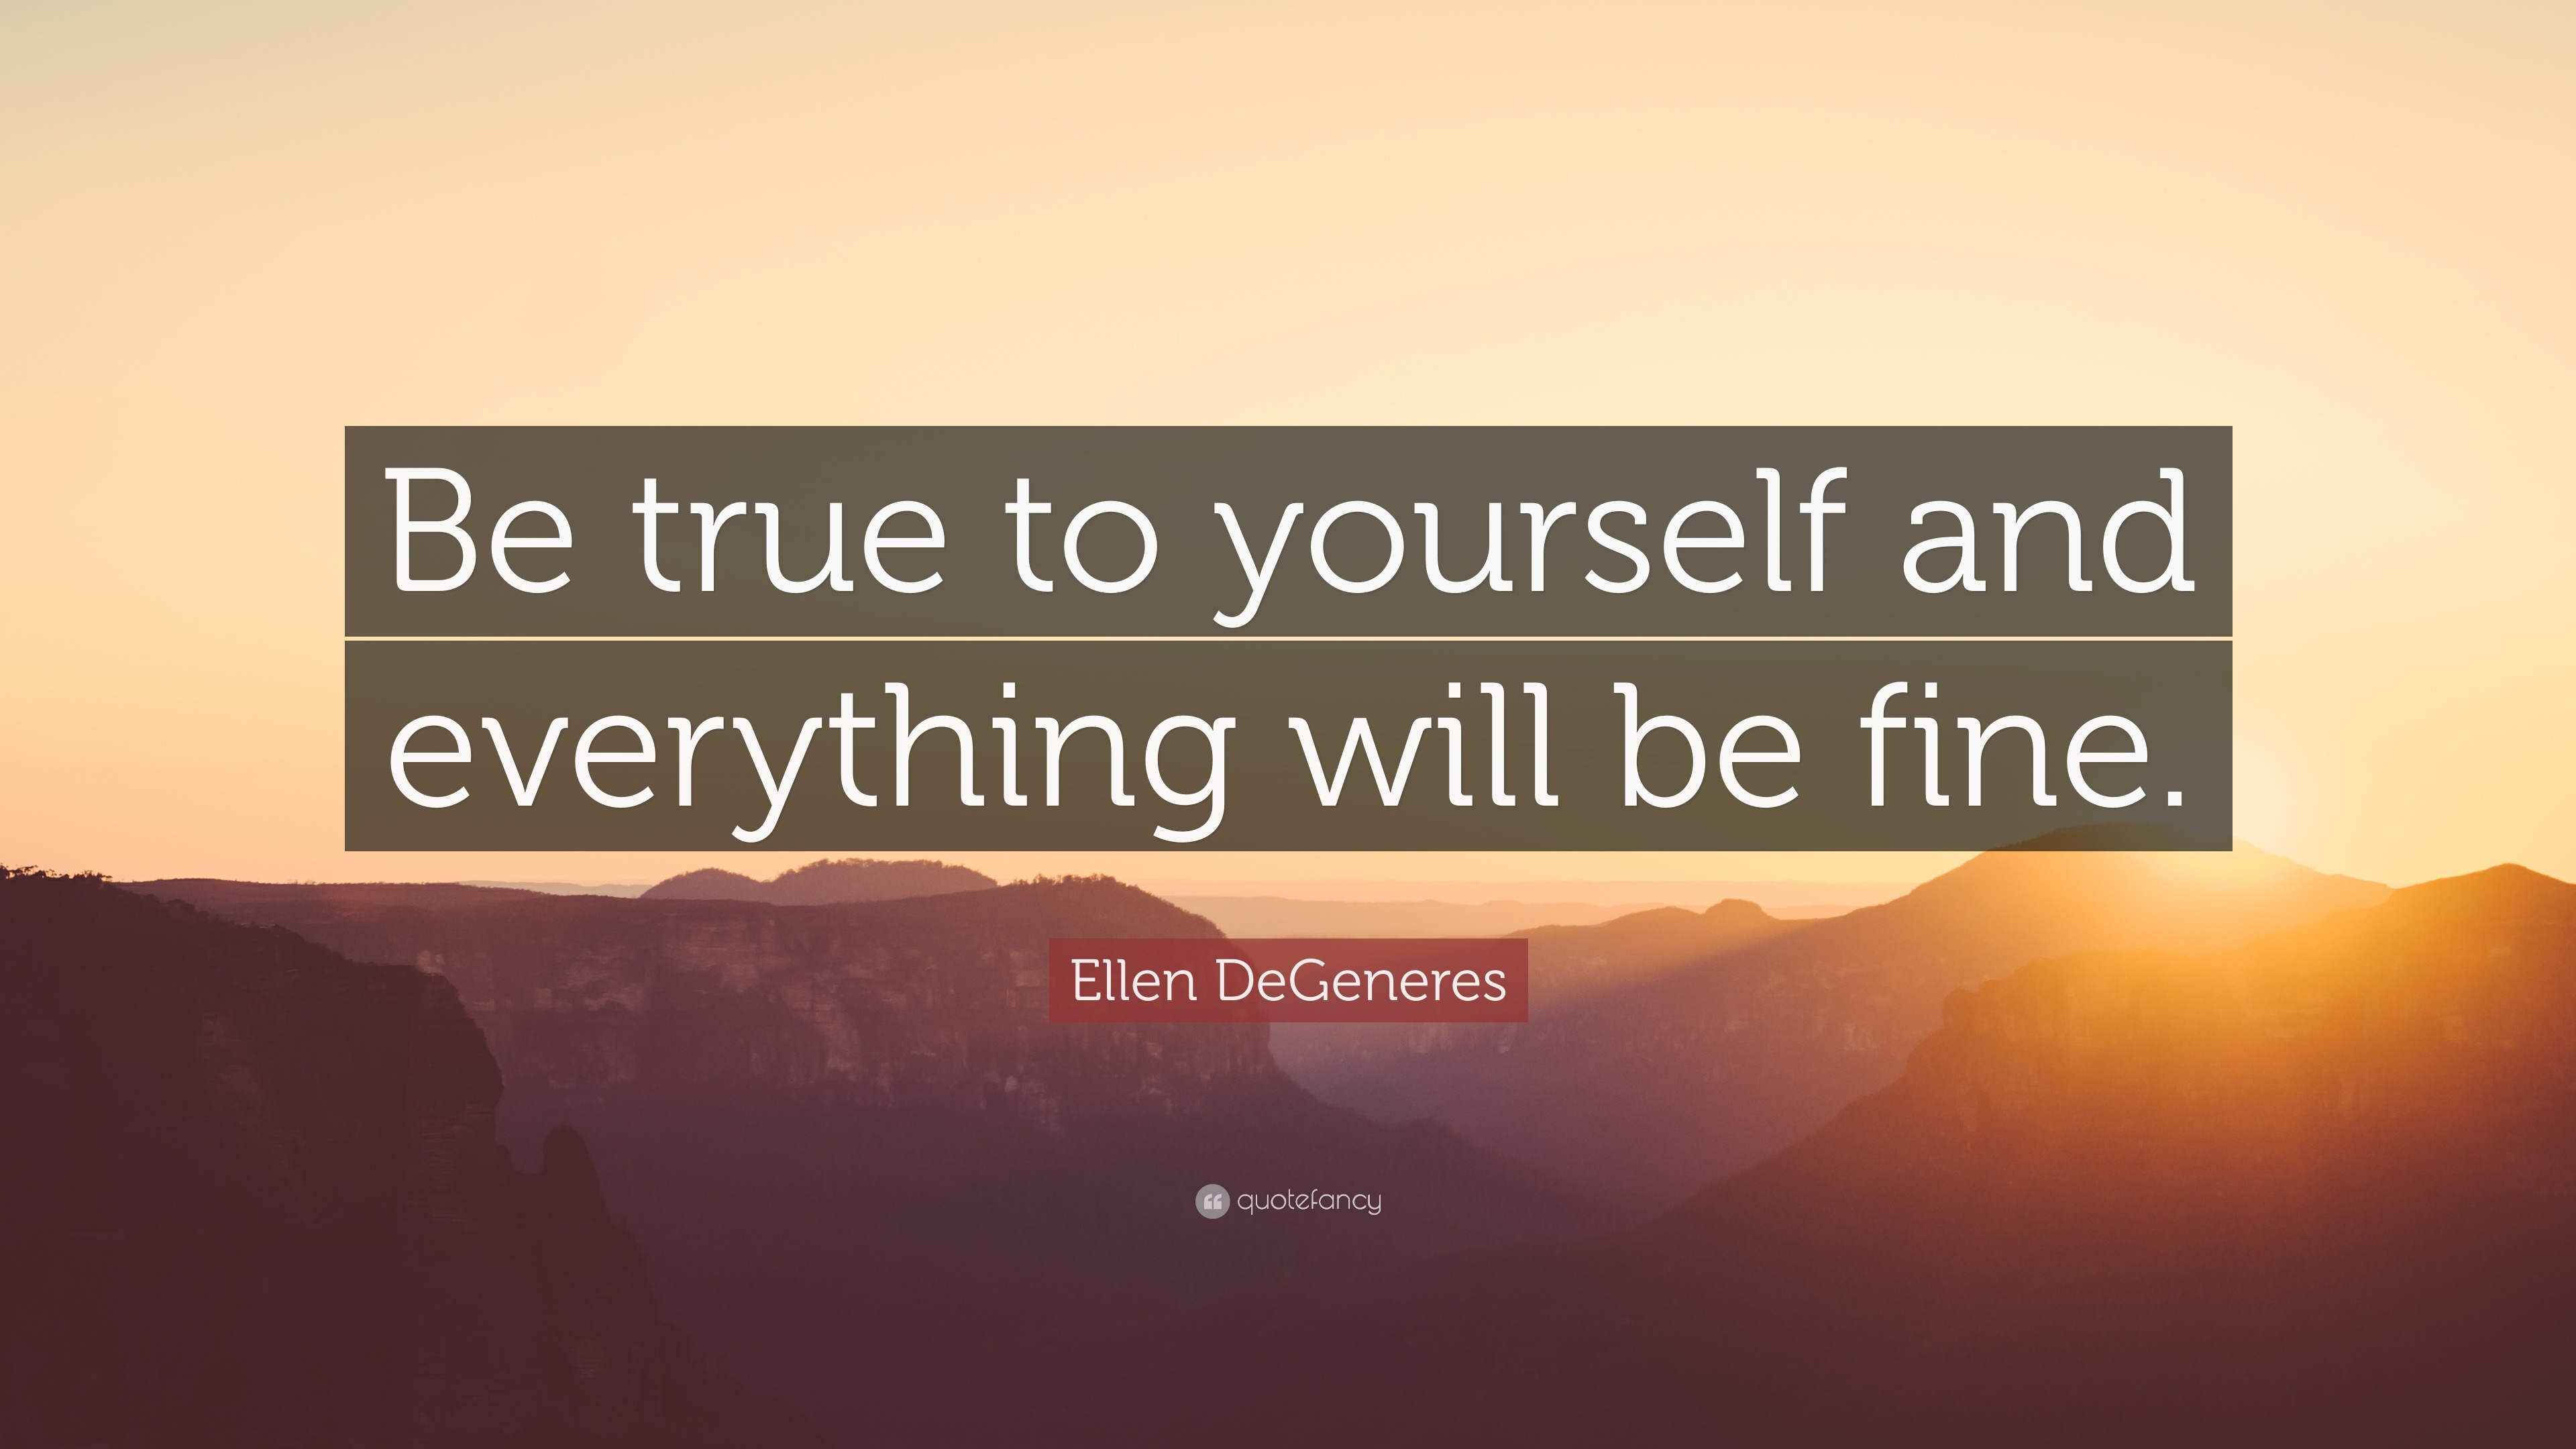 Ellen DeGeneres Quote “Be true to yourself and everything